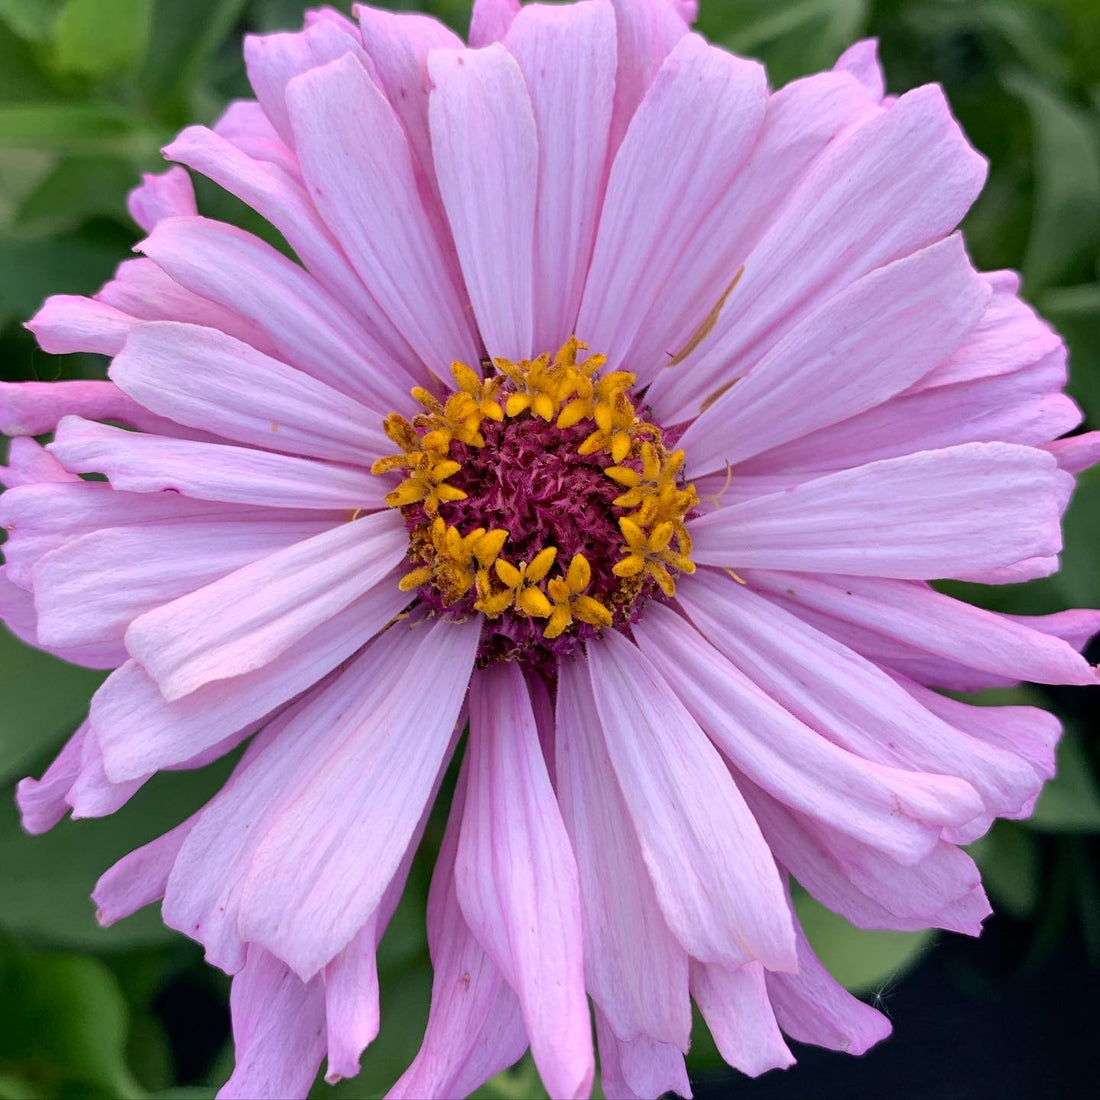 Farewell to our lilac zinnias